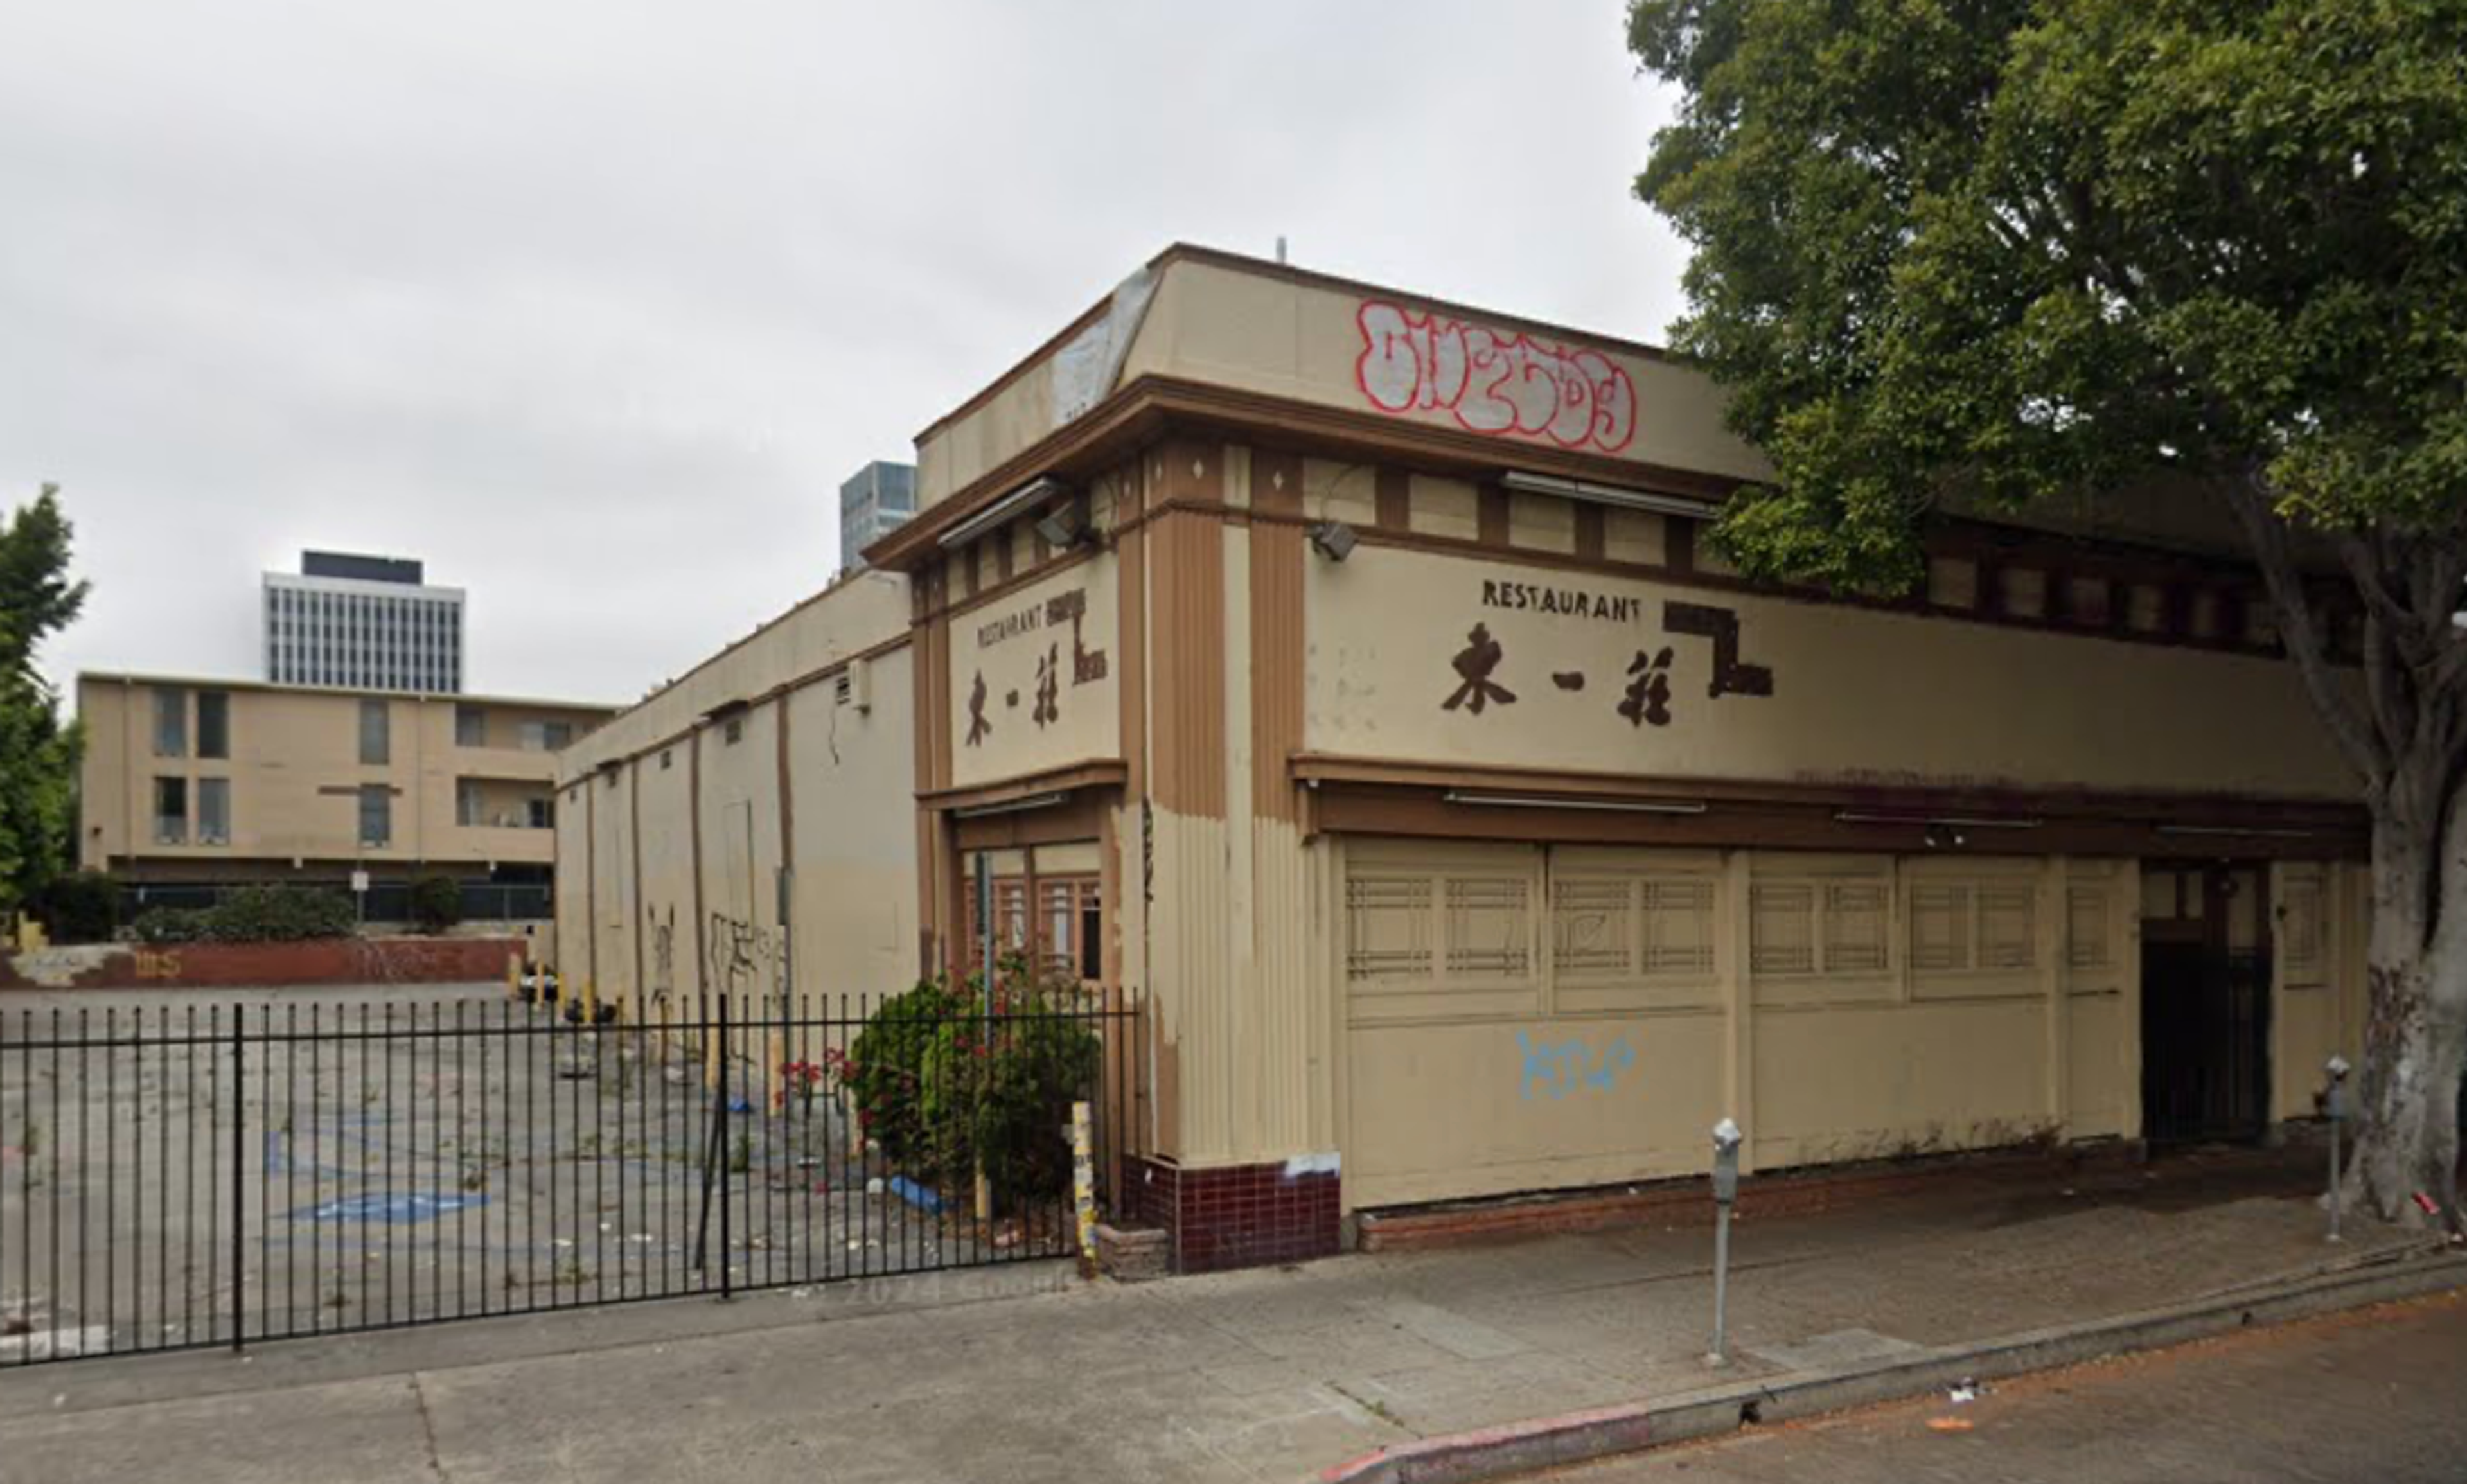 Street View of 3455 W. 8th Street, a boarded-up, defaced one-story former Korean restaurant.